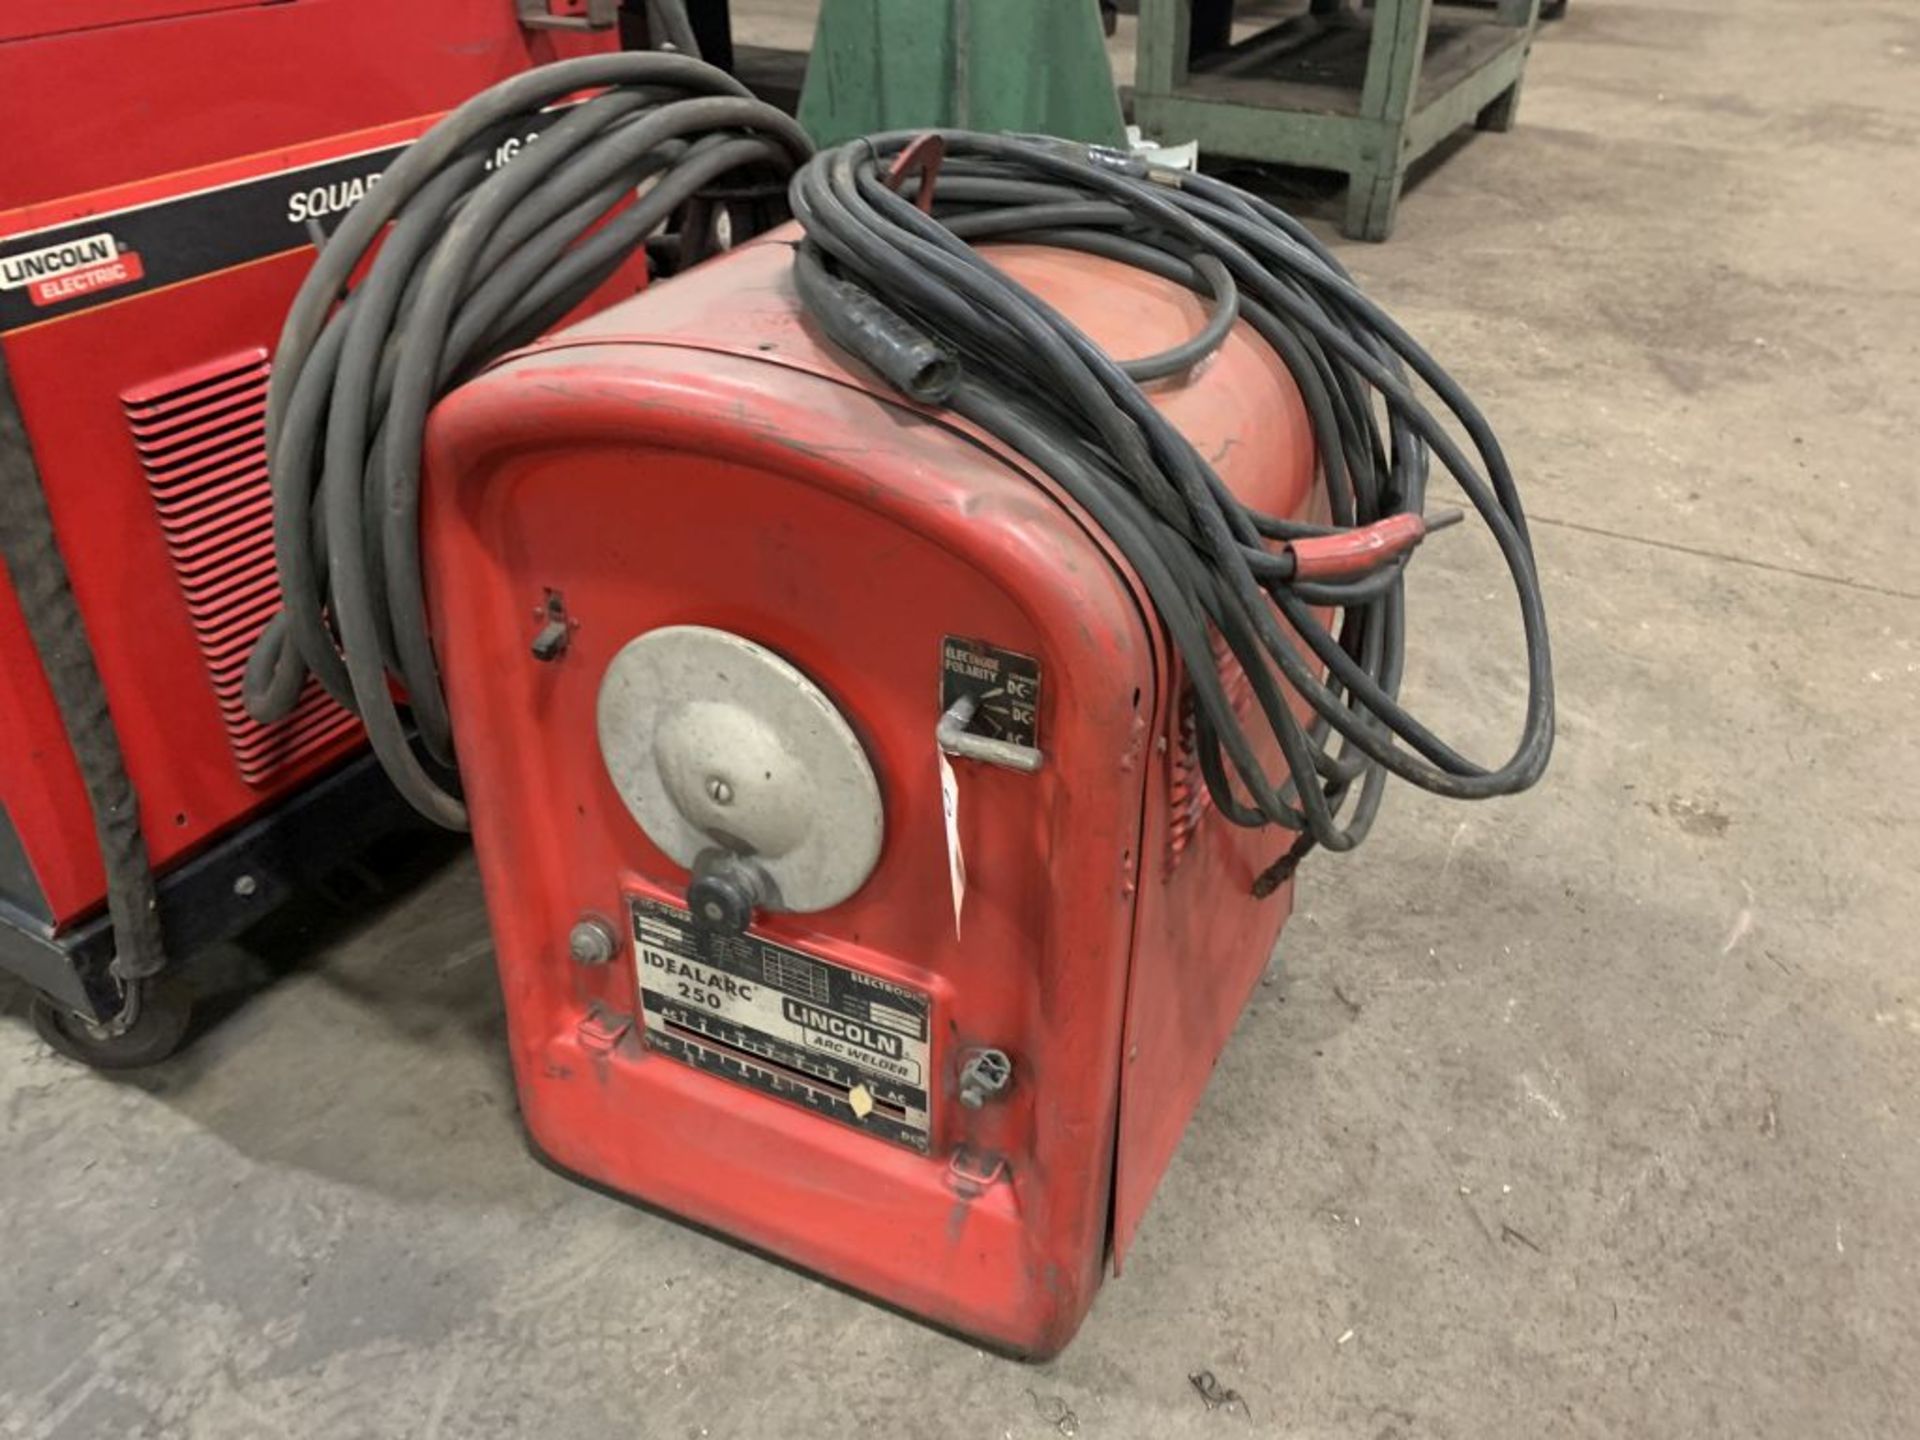 Lincoln Ideal Arc 250 Arc Welder, serial number - Ac-340091